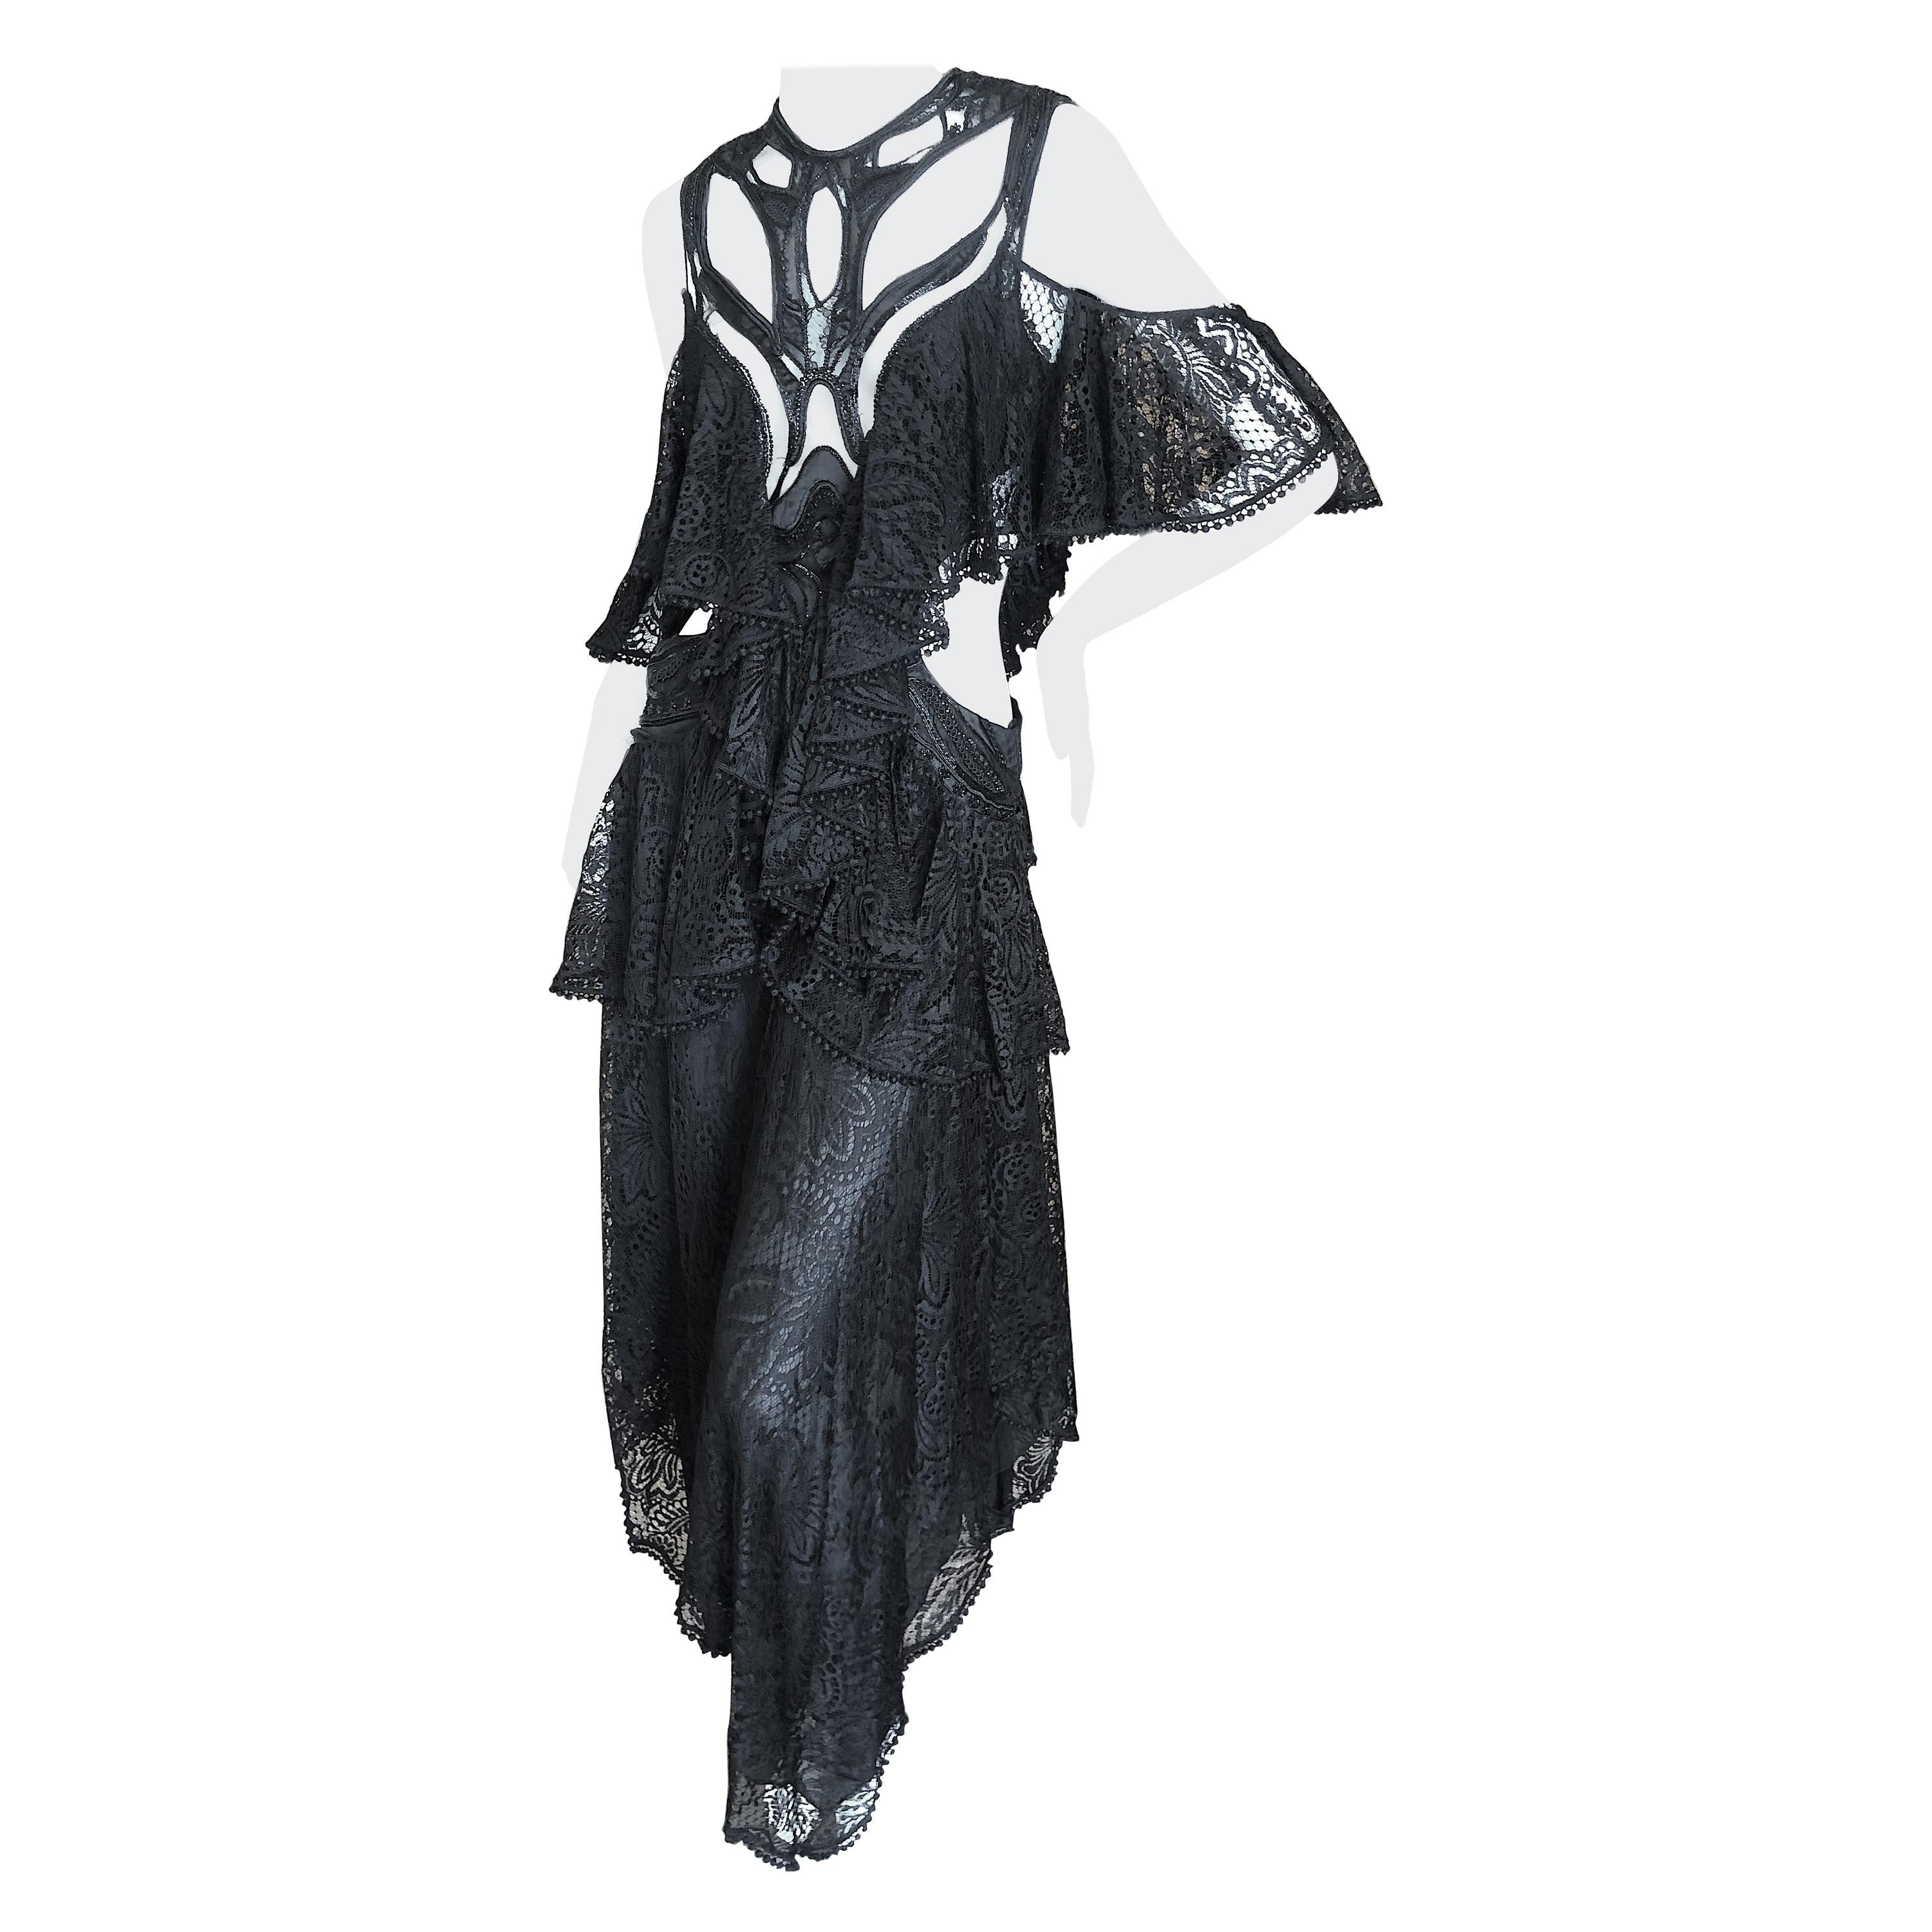 Alexander McQueen Pre Fall 2018 Goth Black Lace Beaded Dress by Sarah Burton For Sale